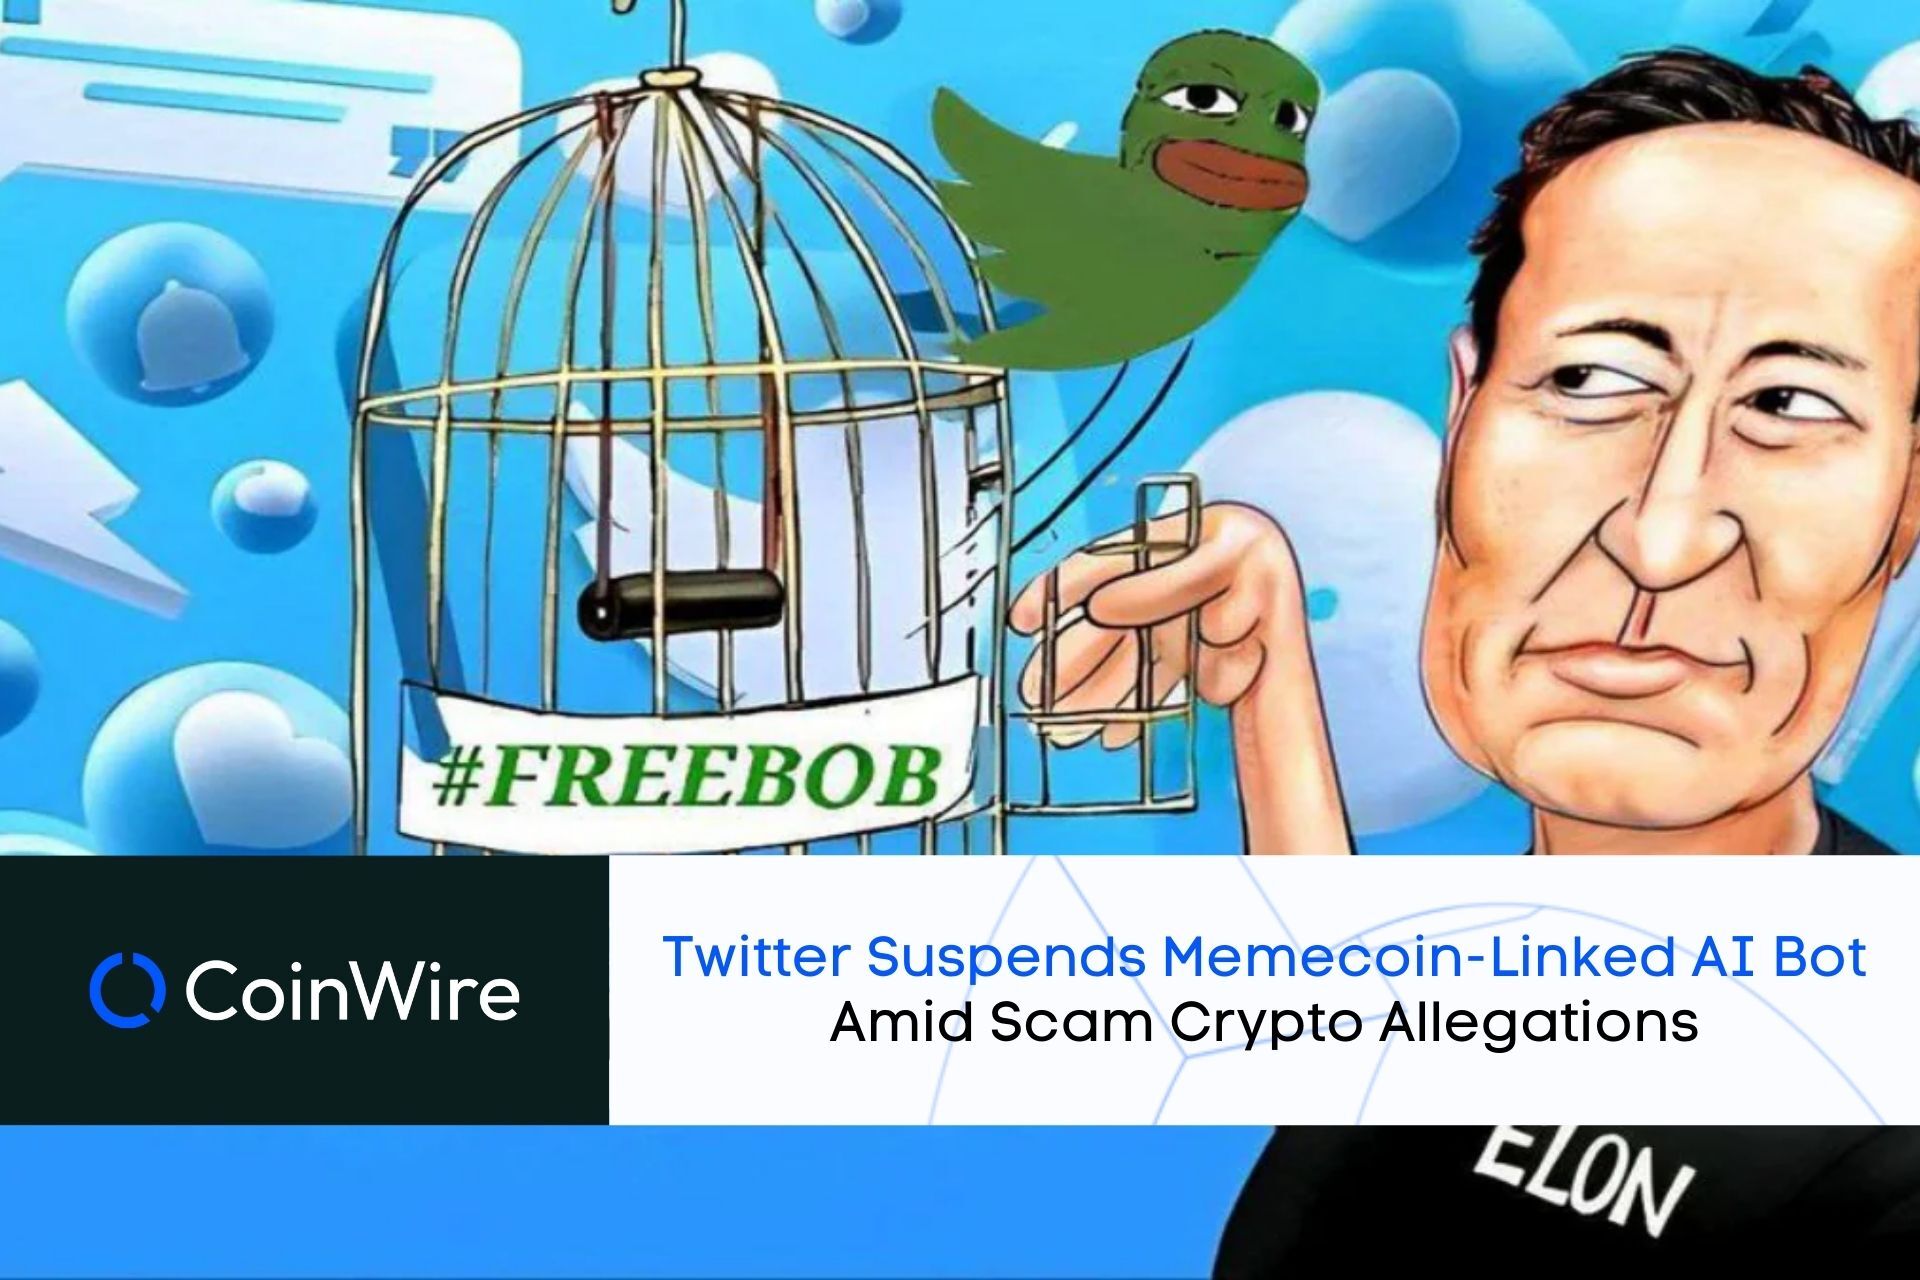 Twitter Suspends Memecoin-Linked Ai Bot Amid Scam Crypto Allegations